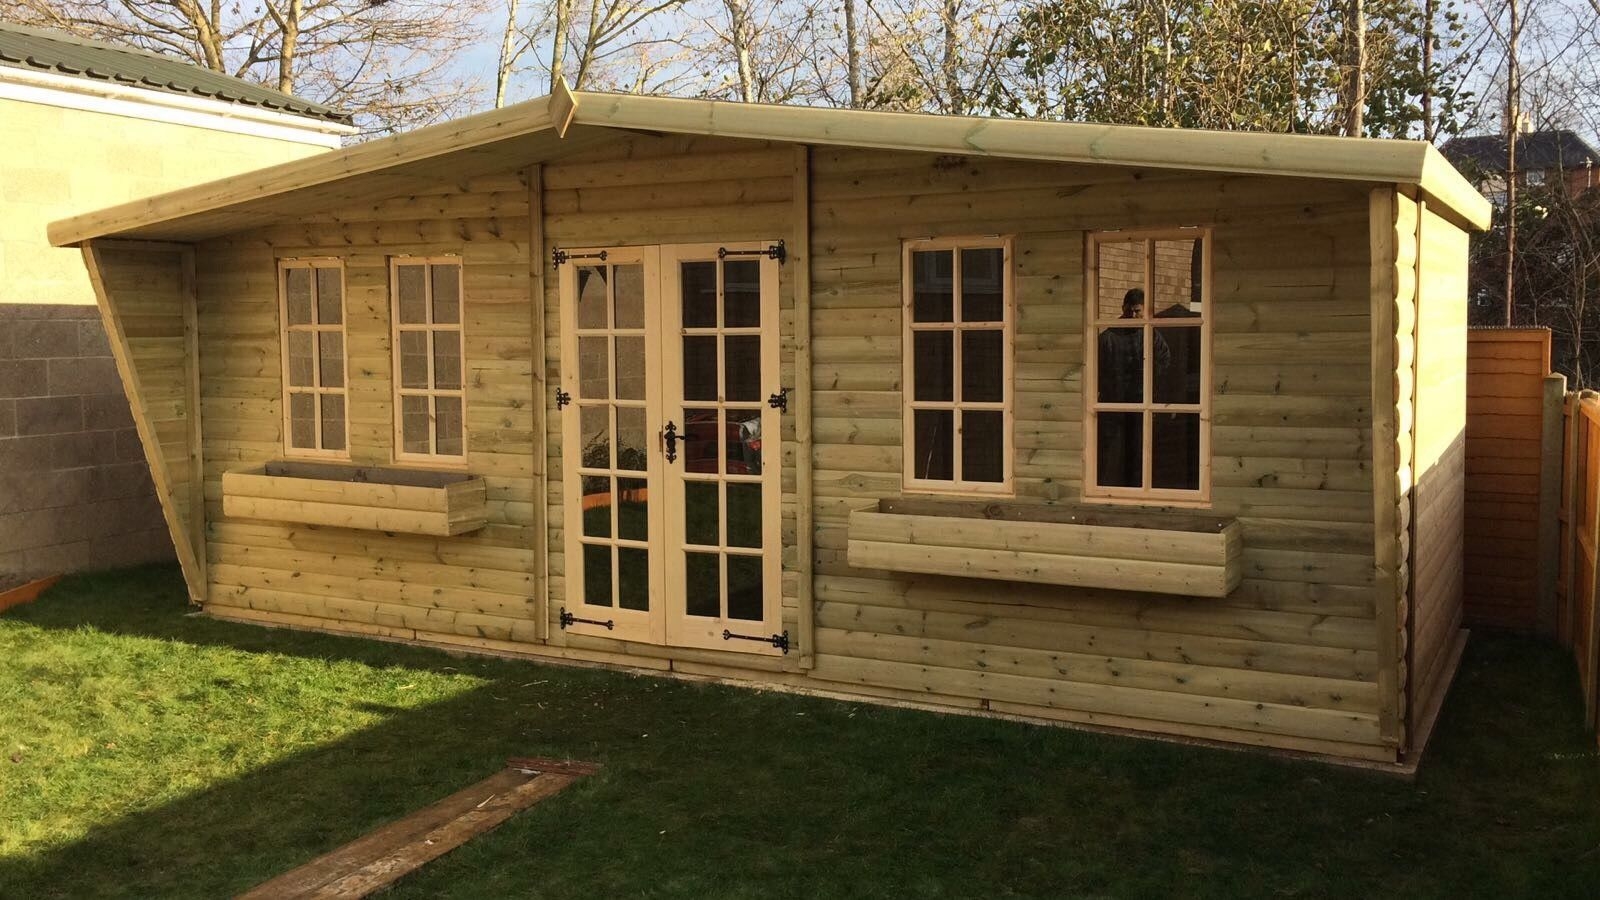 20 x 10ft Wooden Garden Summerhouse Tanalised Log Lap 2ft Canopy Tapered Gabled Roof